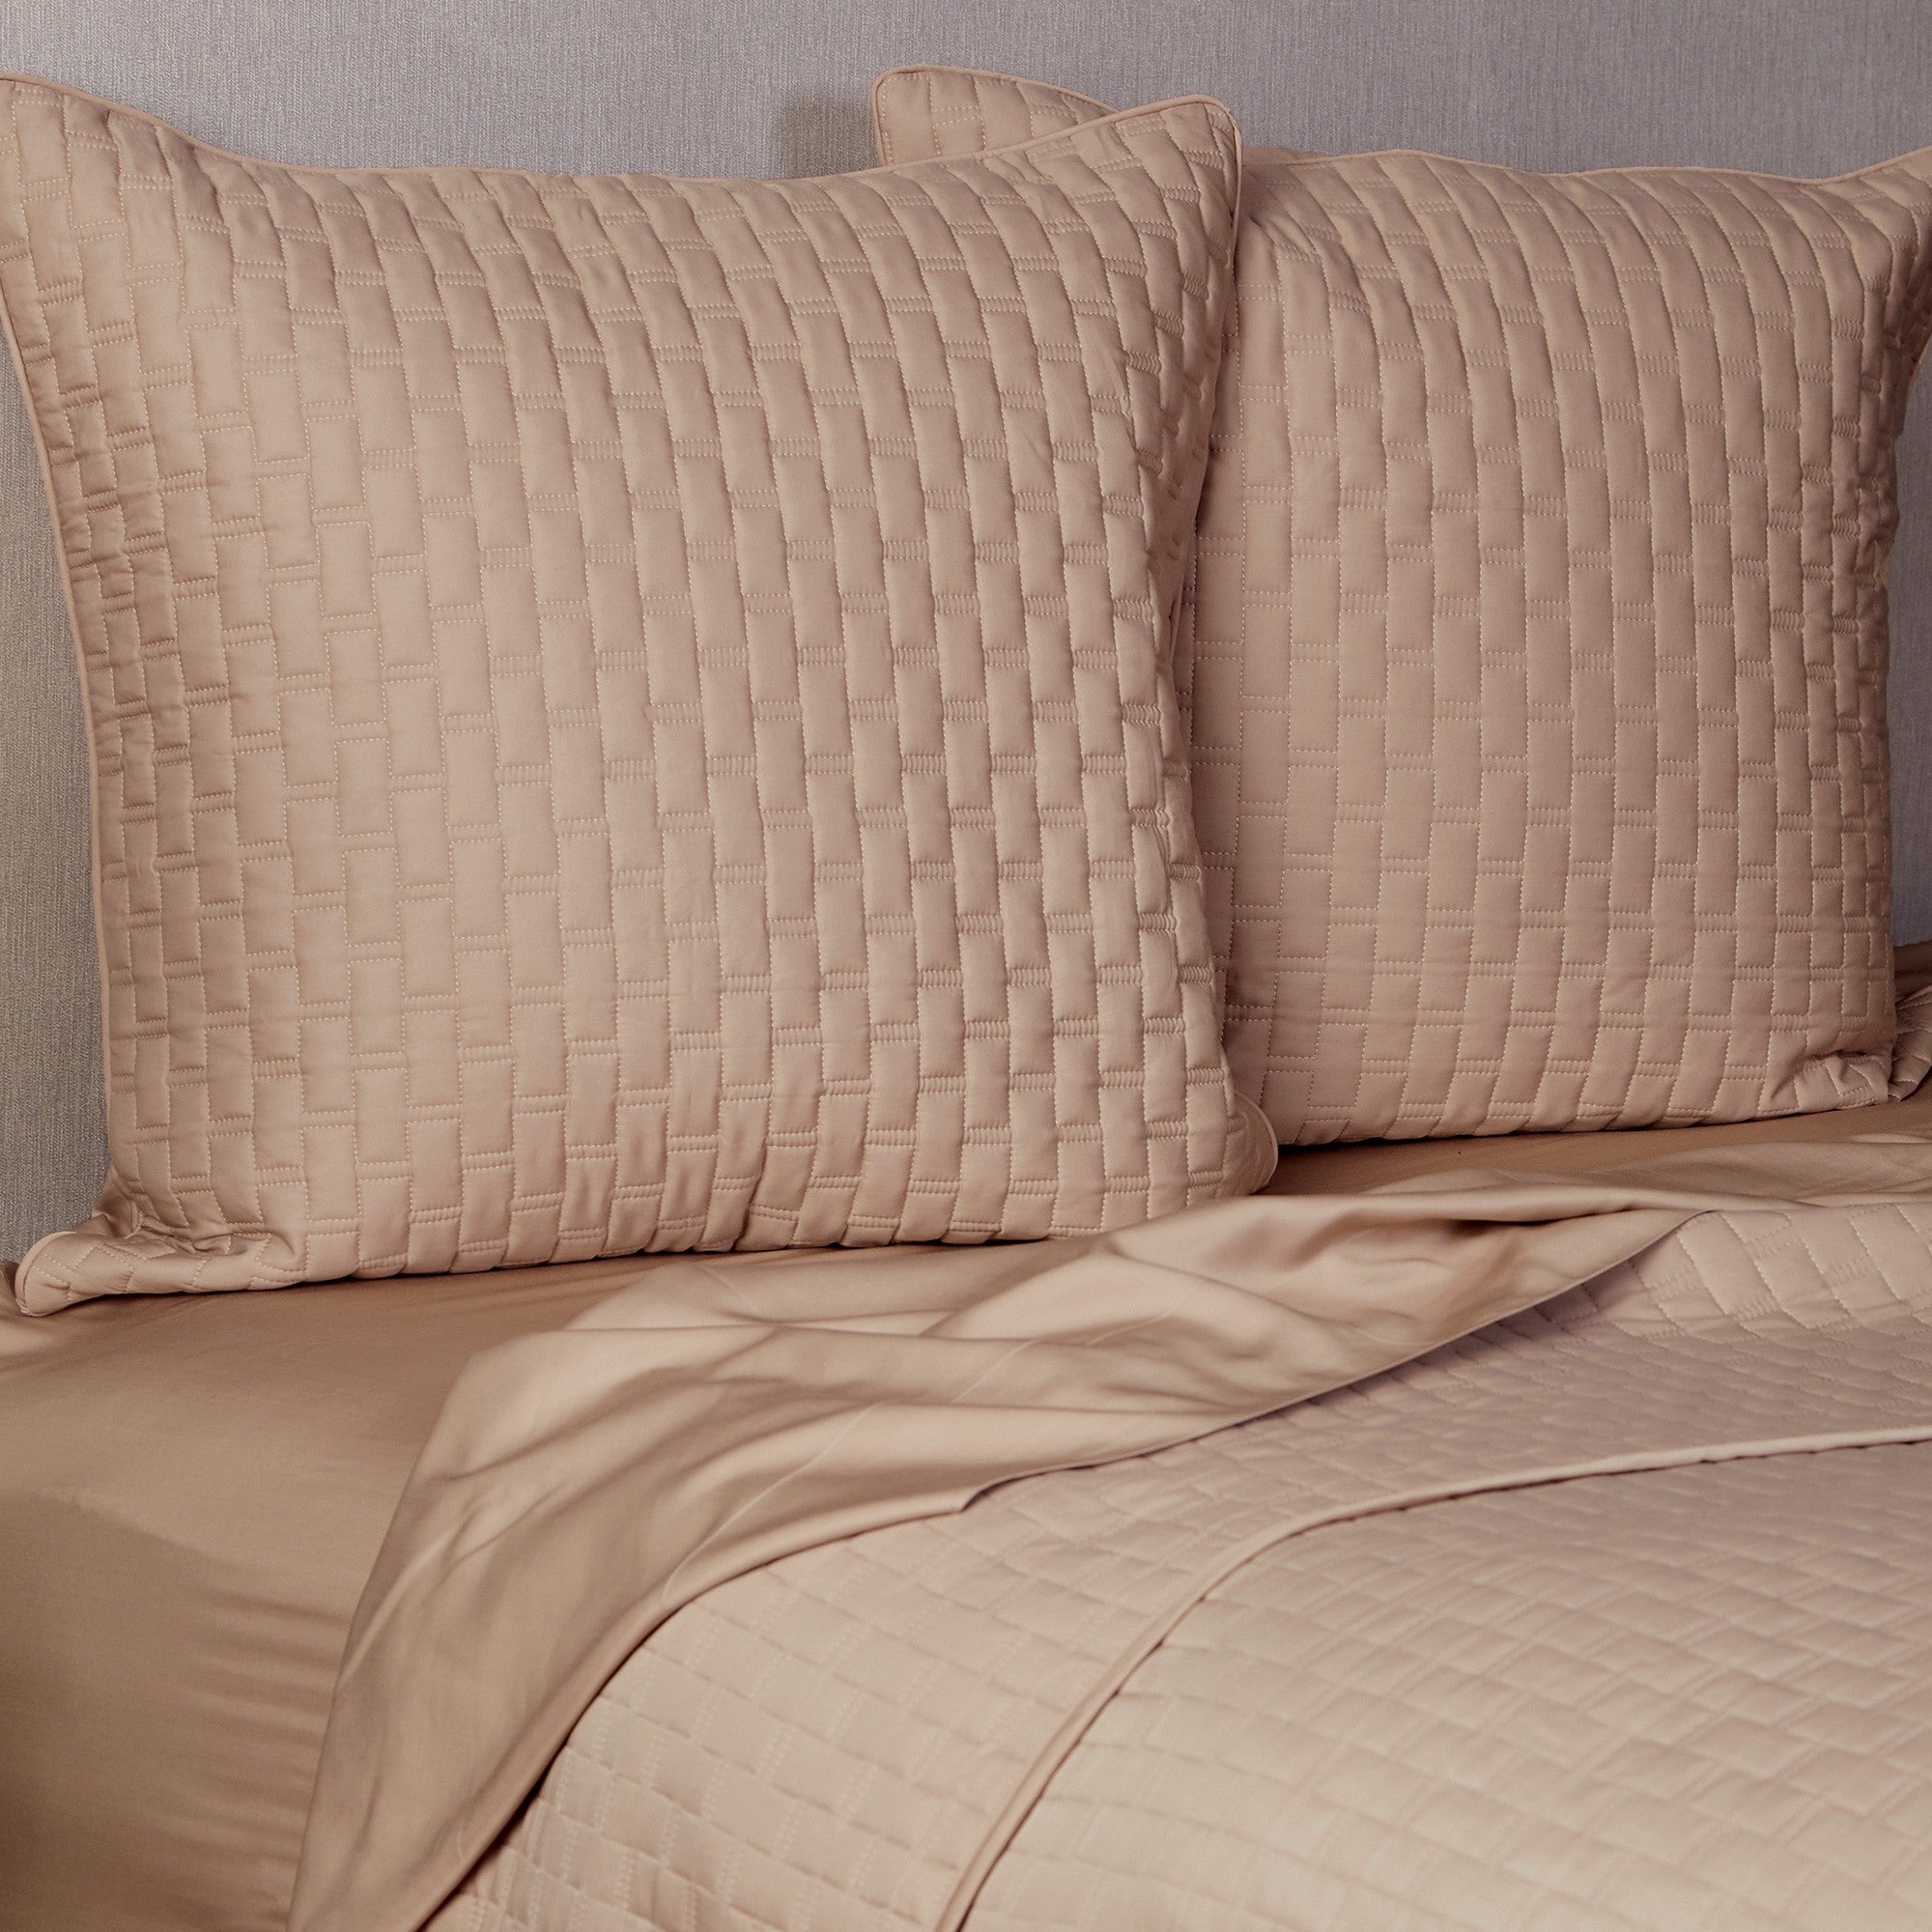 100% BAMBOO Quilted Euro Sham - Ultra-Soft, Hypoallergenic, Gentle on Hair and Skin - Perfect Size to Comfortable Read or Work in Bed - Champagne